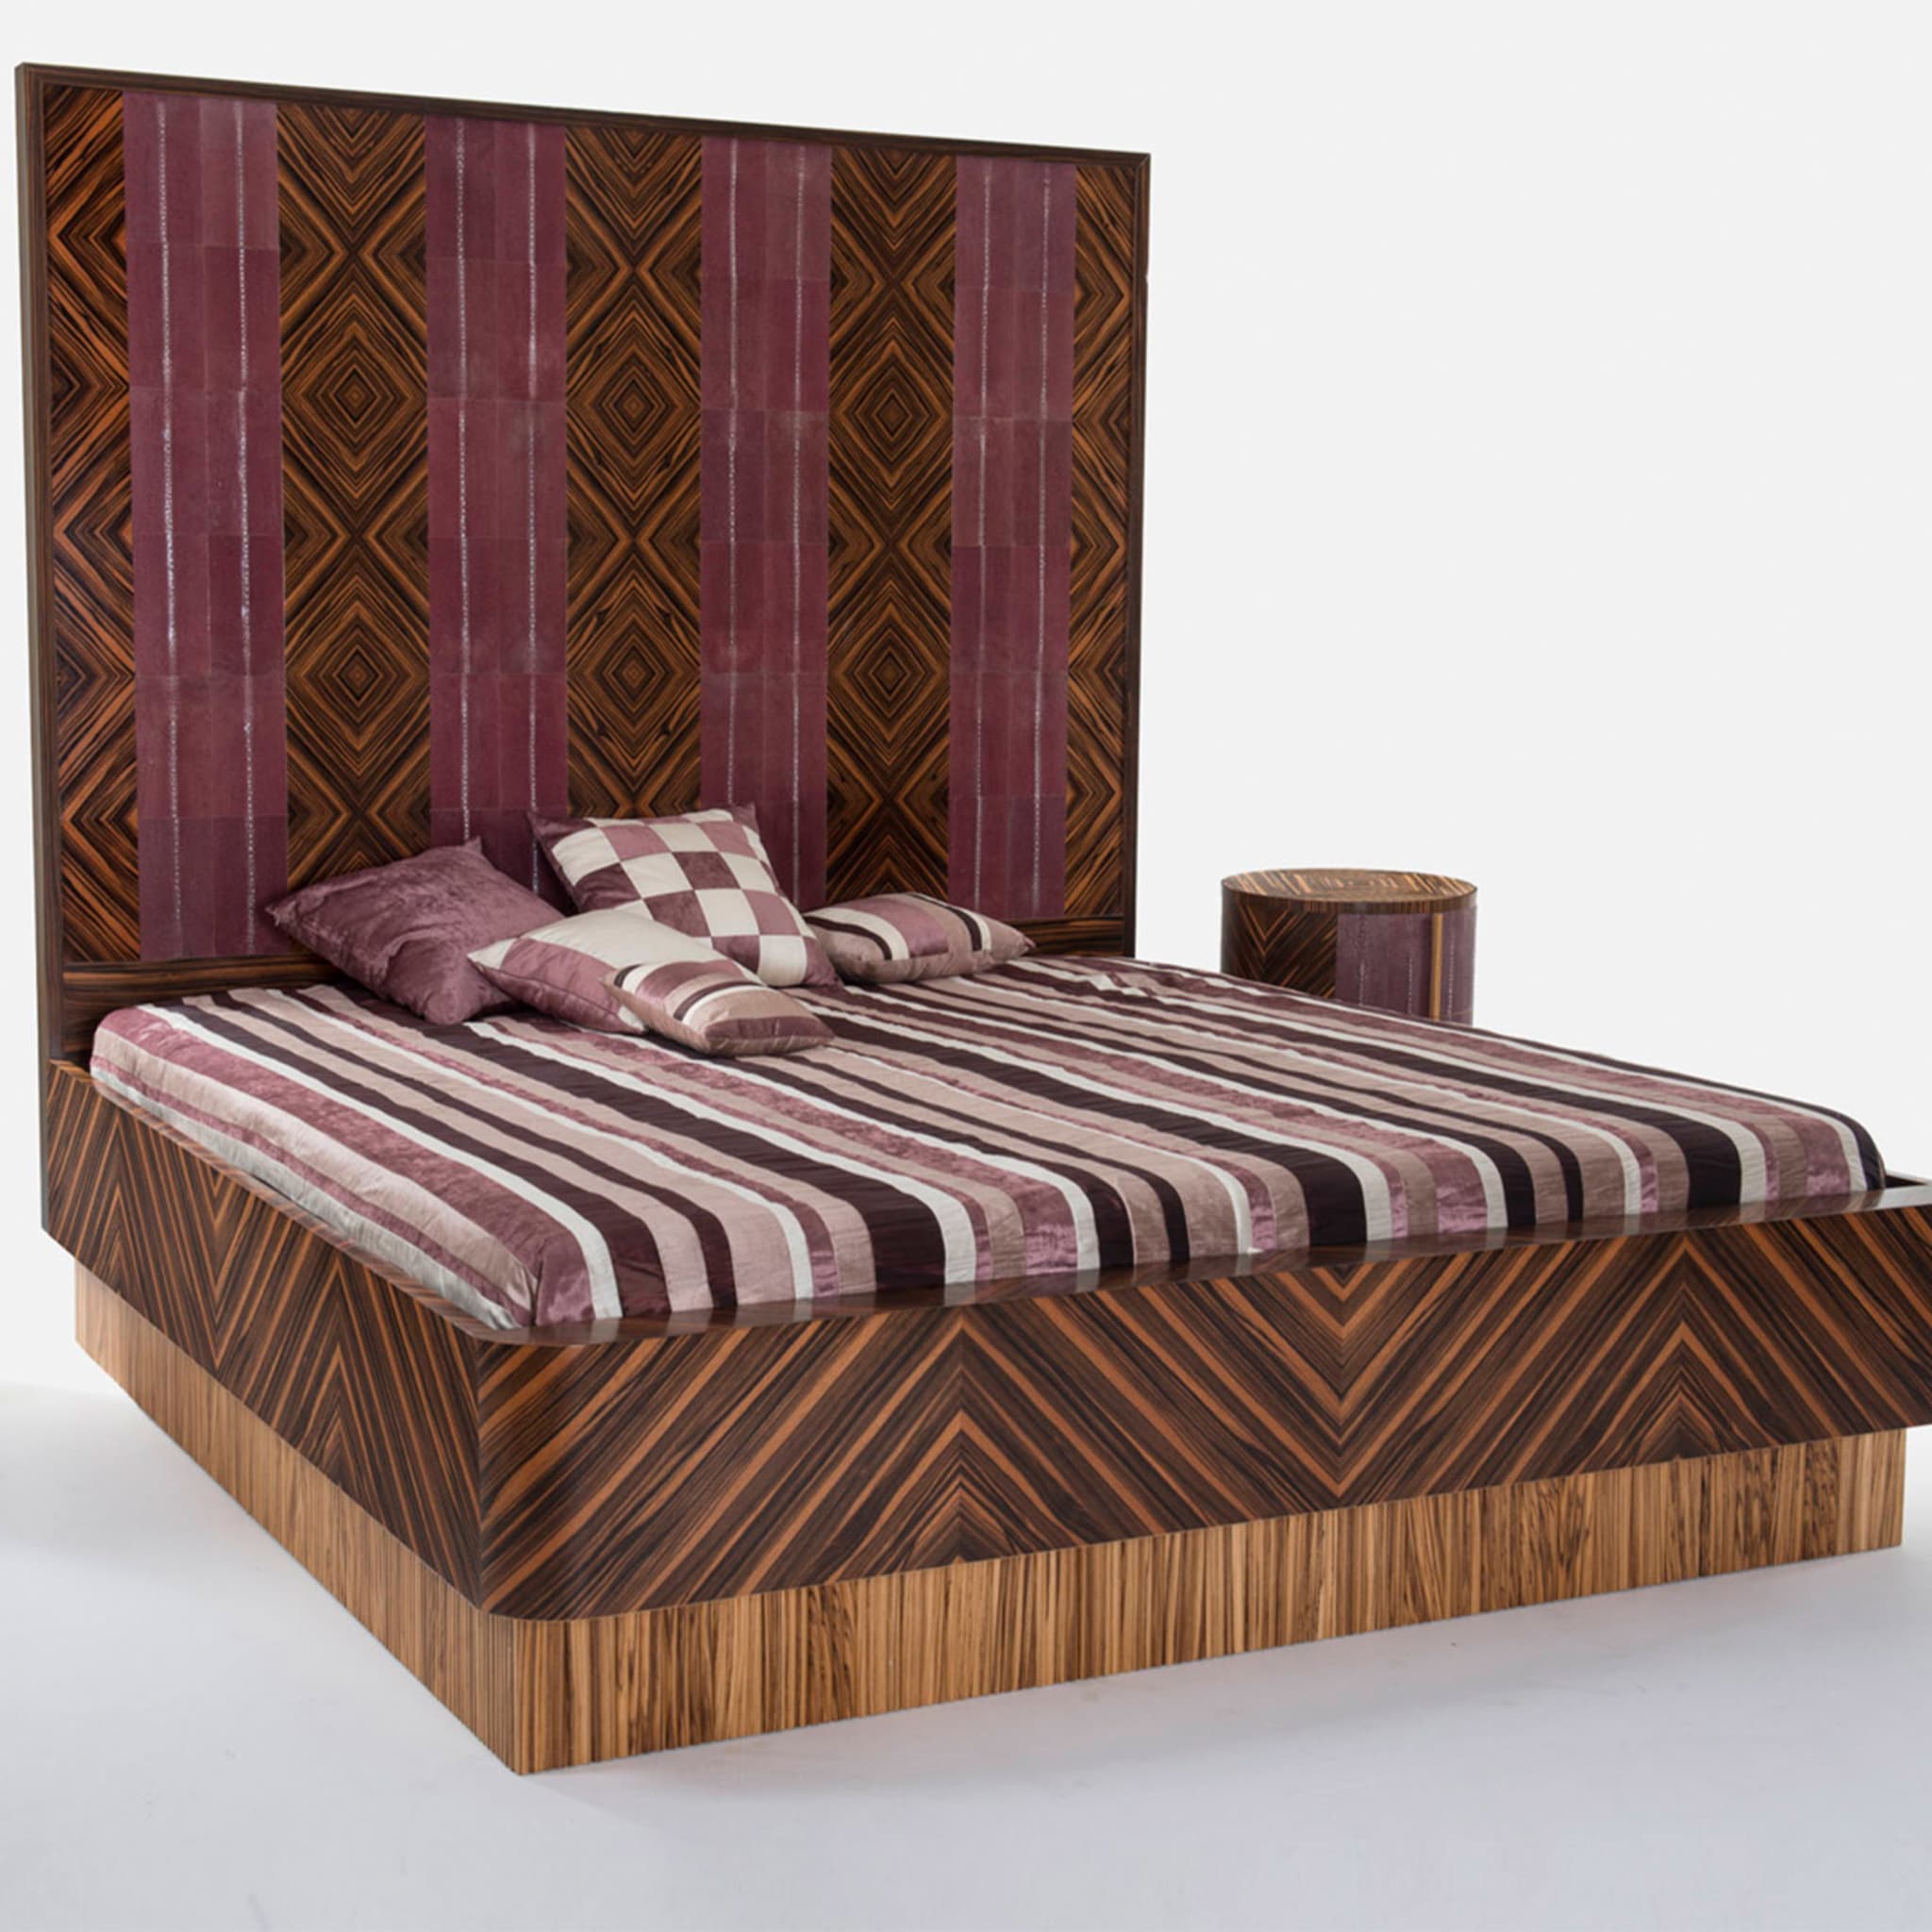 Ardito King Size Bed - Alternative view 1